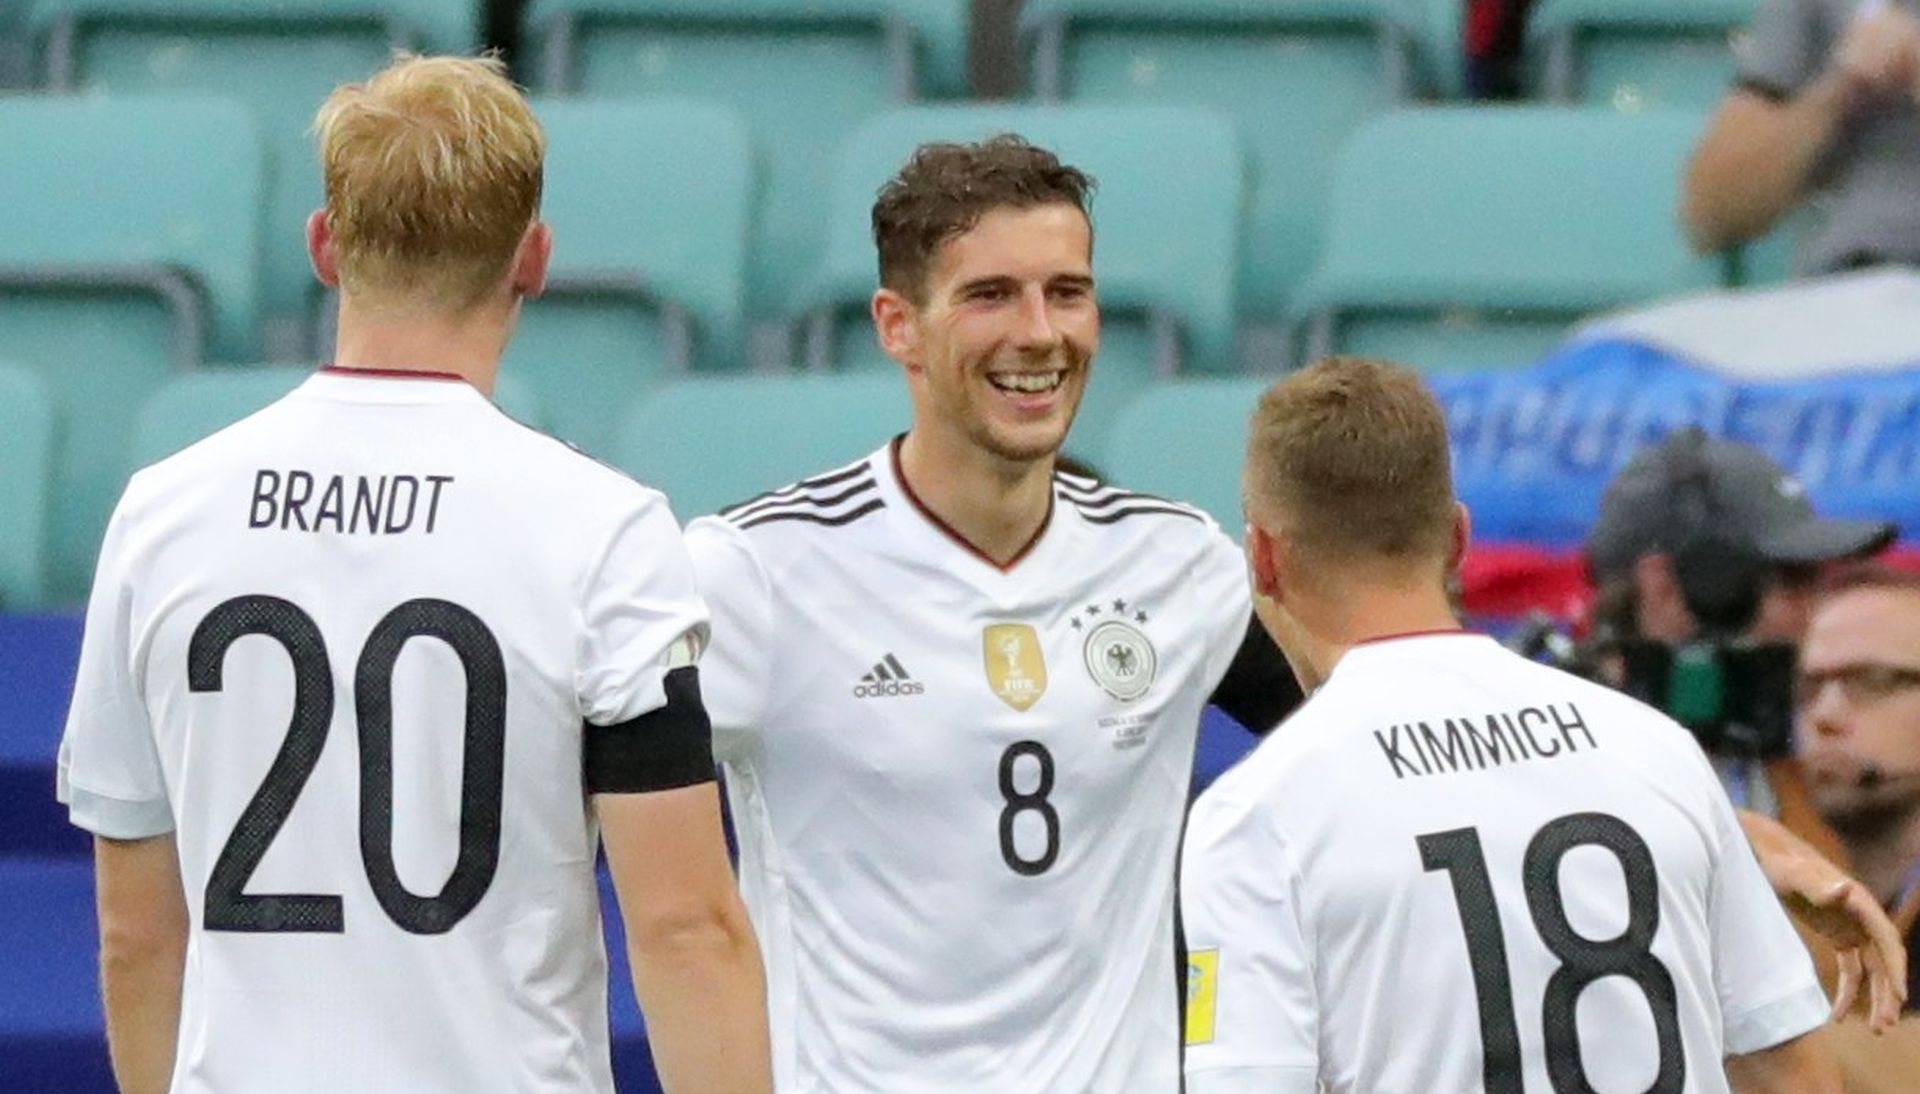 epa06037648 Leon Goretzka (C) of Germany celebrates with teammates after scoring the 3-1 lead  during the FIFA Confederations Cup 2017 group B soccer match between Australia and Germany at the Fisht Stadium in Sochi, Russia, 19 June 2017.  EPA/ARMANDO BABANI